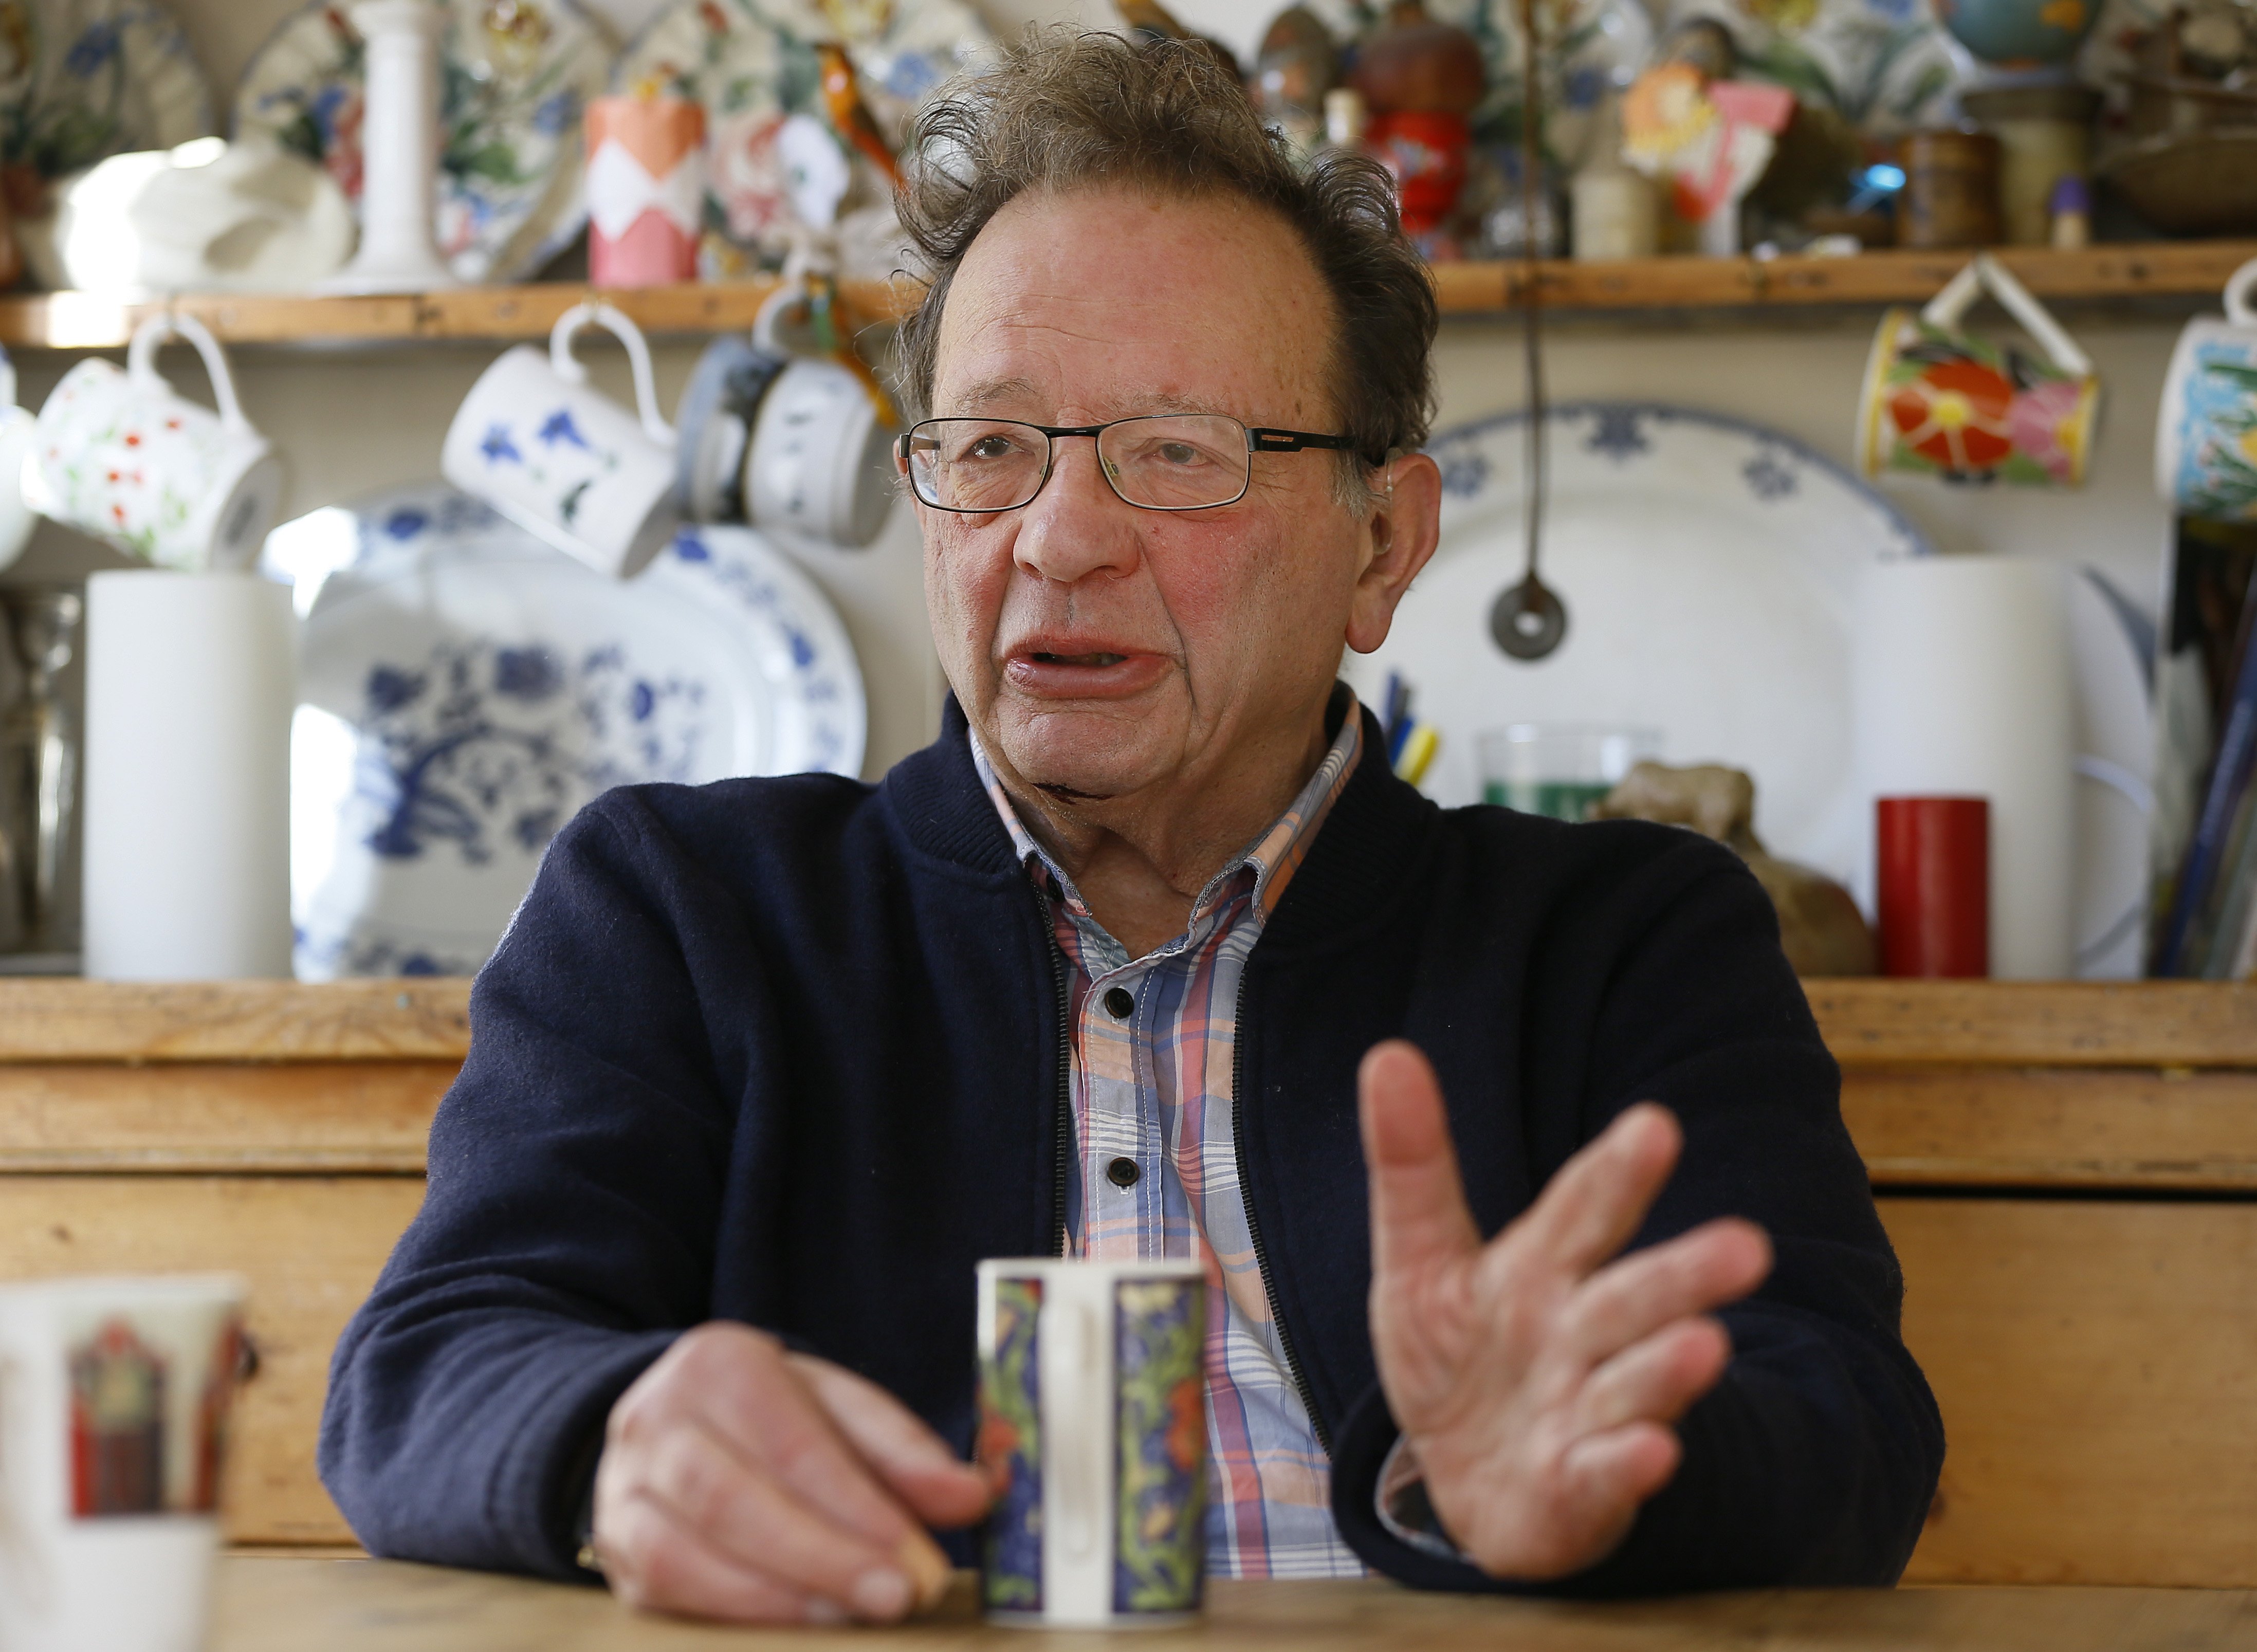 Larry Sanders at home in his kitchen in Oxford, England, on Feb. 15, 2016. (Kirsty Wigglesworth—AP)